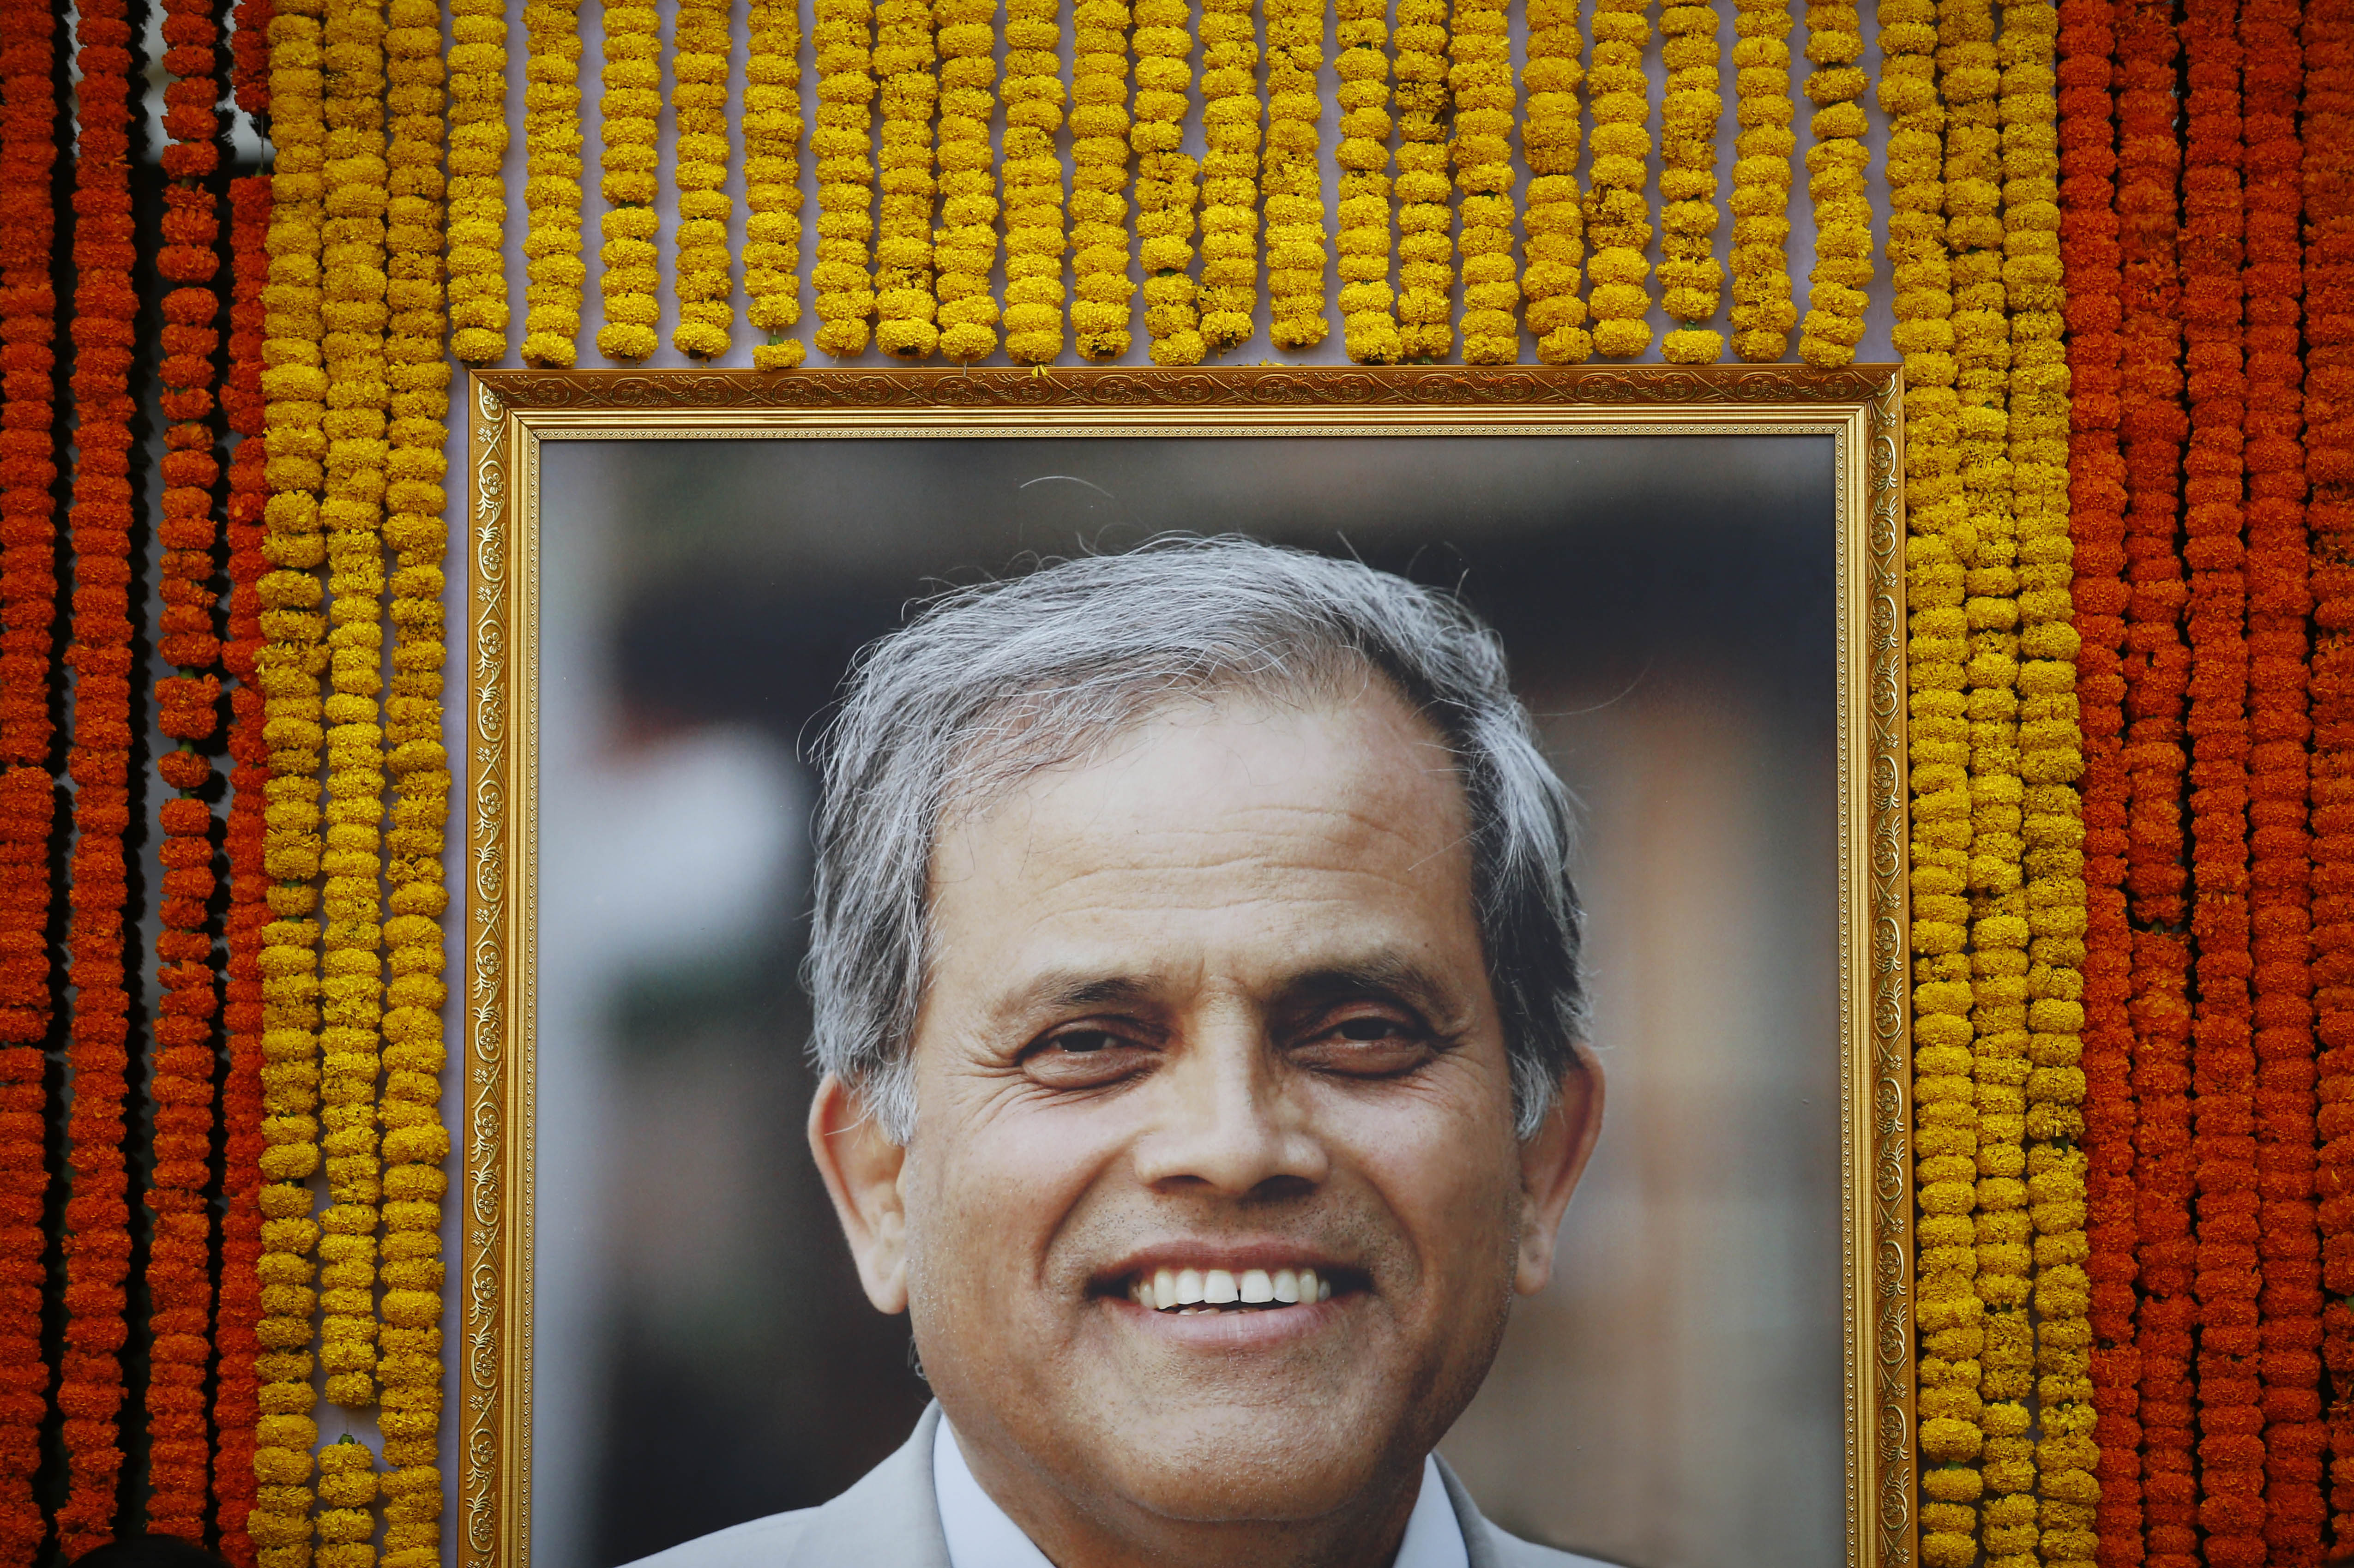 A portrait of late renowned neurosurgeon Dr Upendra Devkota is pictured during his funeral ceremony at Neuro Hospital in Kathmandu on Tuesday, June 19, 2018. He passed away at the age of 64 after suffering from bile duct cancer. Photo/Skanda Gautam